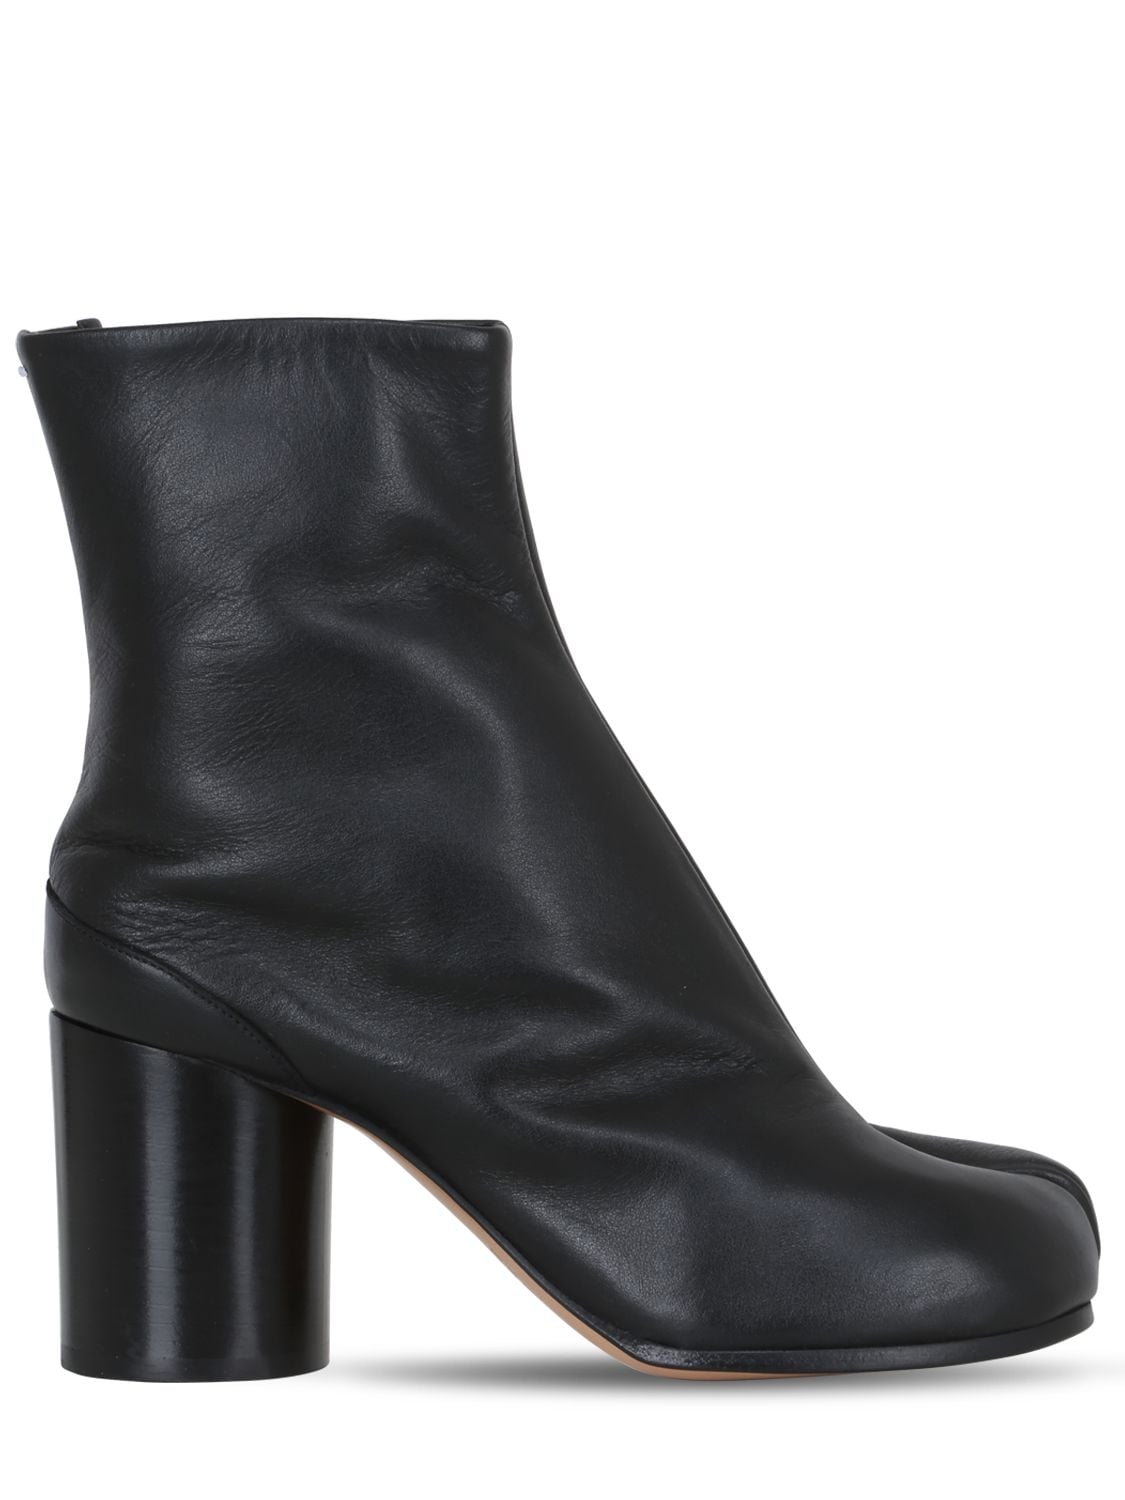 Maison Margiela 80mm Tabi Leather Ankle Boots In Black